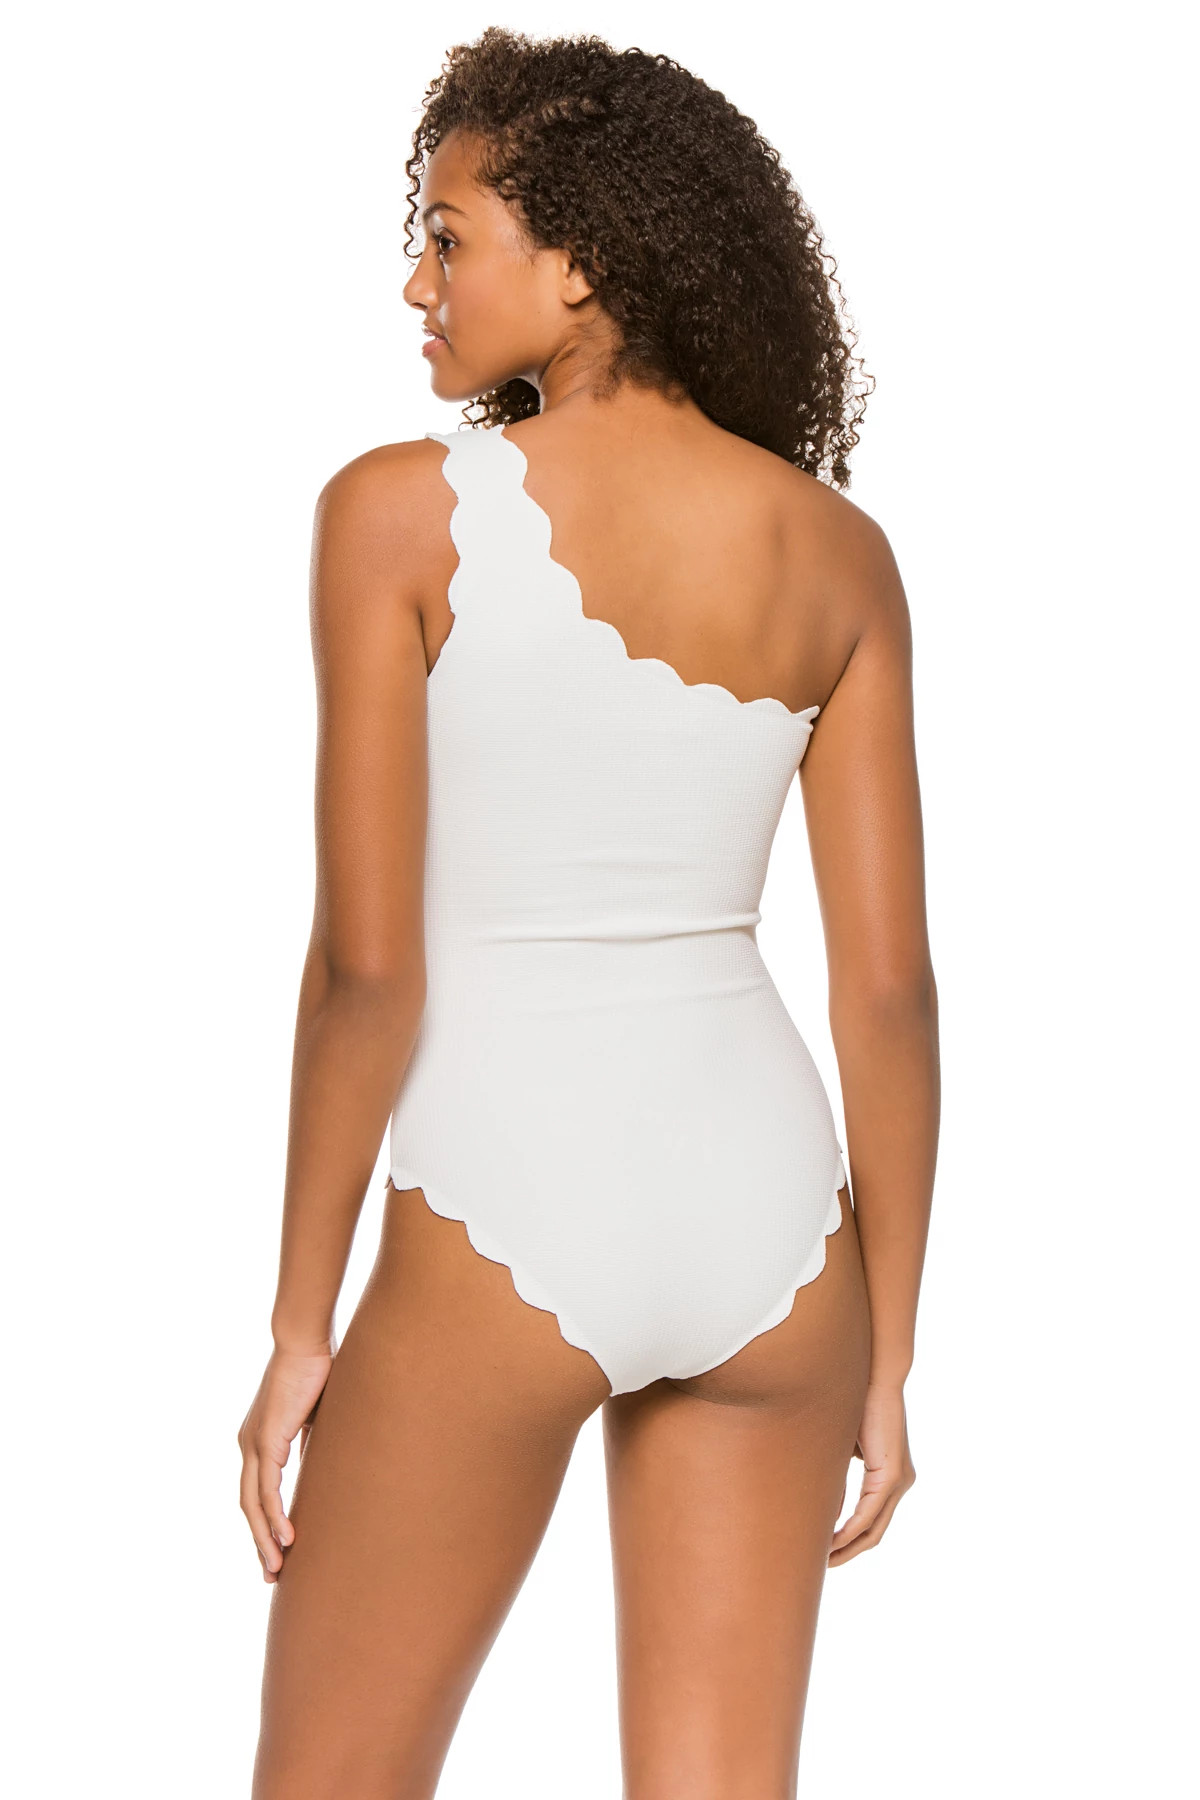 COCONUT Scallop Asymmetrical One Piece Swimsuit image number 2